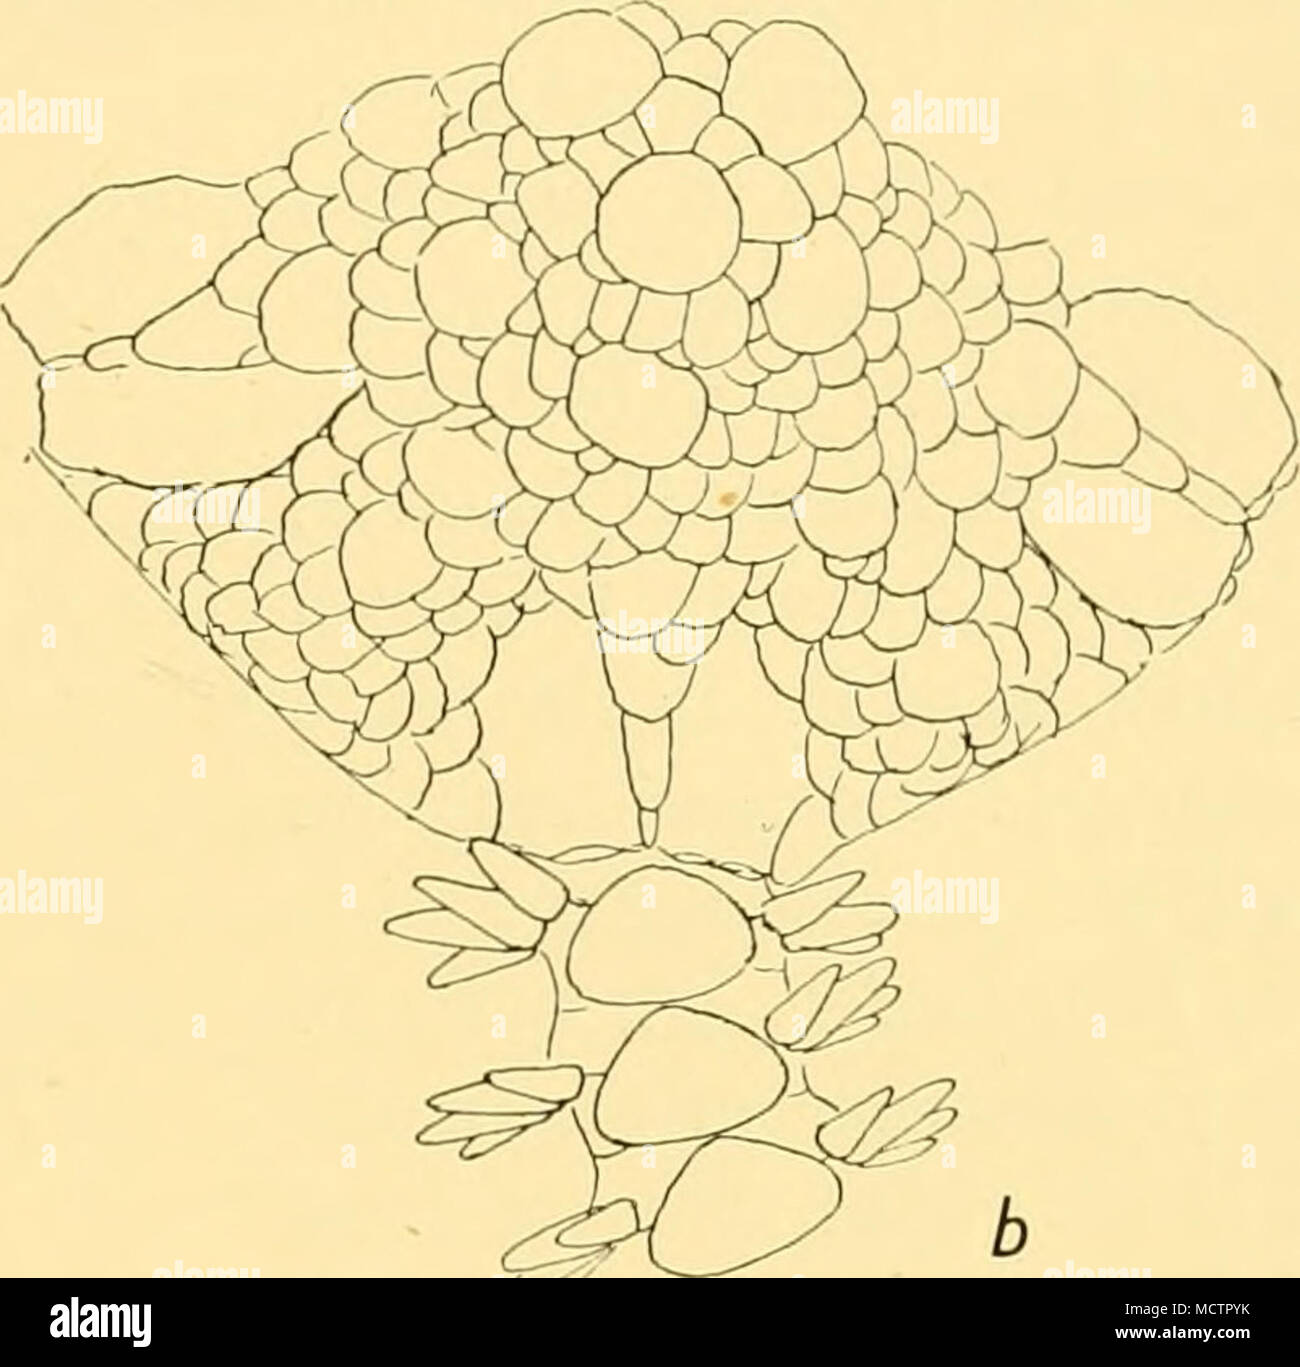 . fes^ Fig. 20. Amphhira da Cunhae, n.sp. Part of oral side («) and dorsal side (6). X22'5. The species has separate sexes, but the eggs are rather large, so it is not improbable that it will prove to be viviparous. There is only one female gonad at each bursa, placed interradially; two male gonads, likewise at the interradial side of the genital slit. It seems evident that this species is closely related to the South African A. albella, Mortensen, from which it is distinguished mainly by the more scale-covered ventral interradii. Perhaps it should rather be designated only as a variety of the Stock Photo